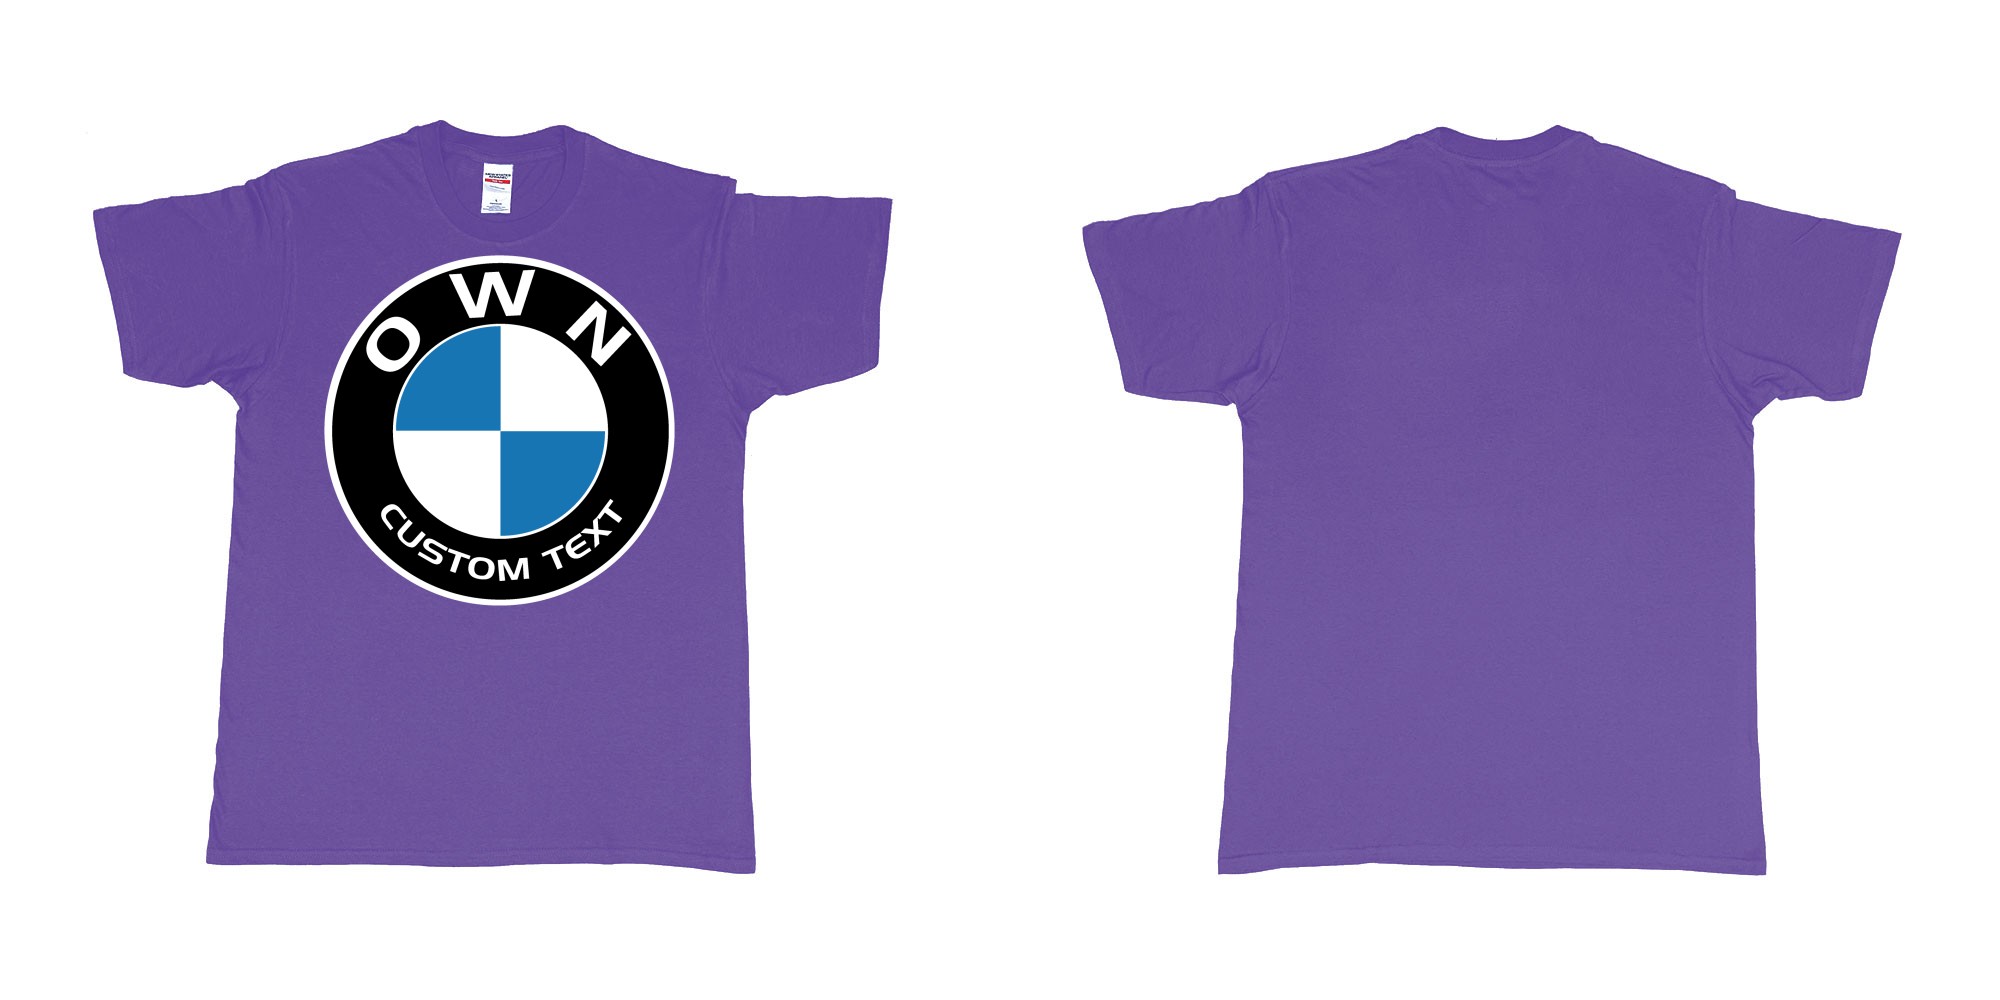 Custom tshirt design BMW logo custom text tshirt printing in fabric color purple choice your own text made in Bali by The Pirate Way